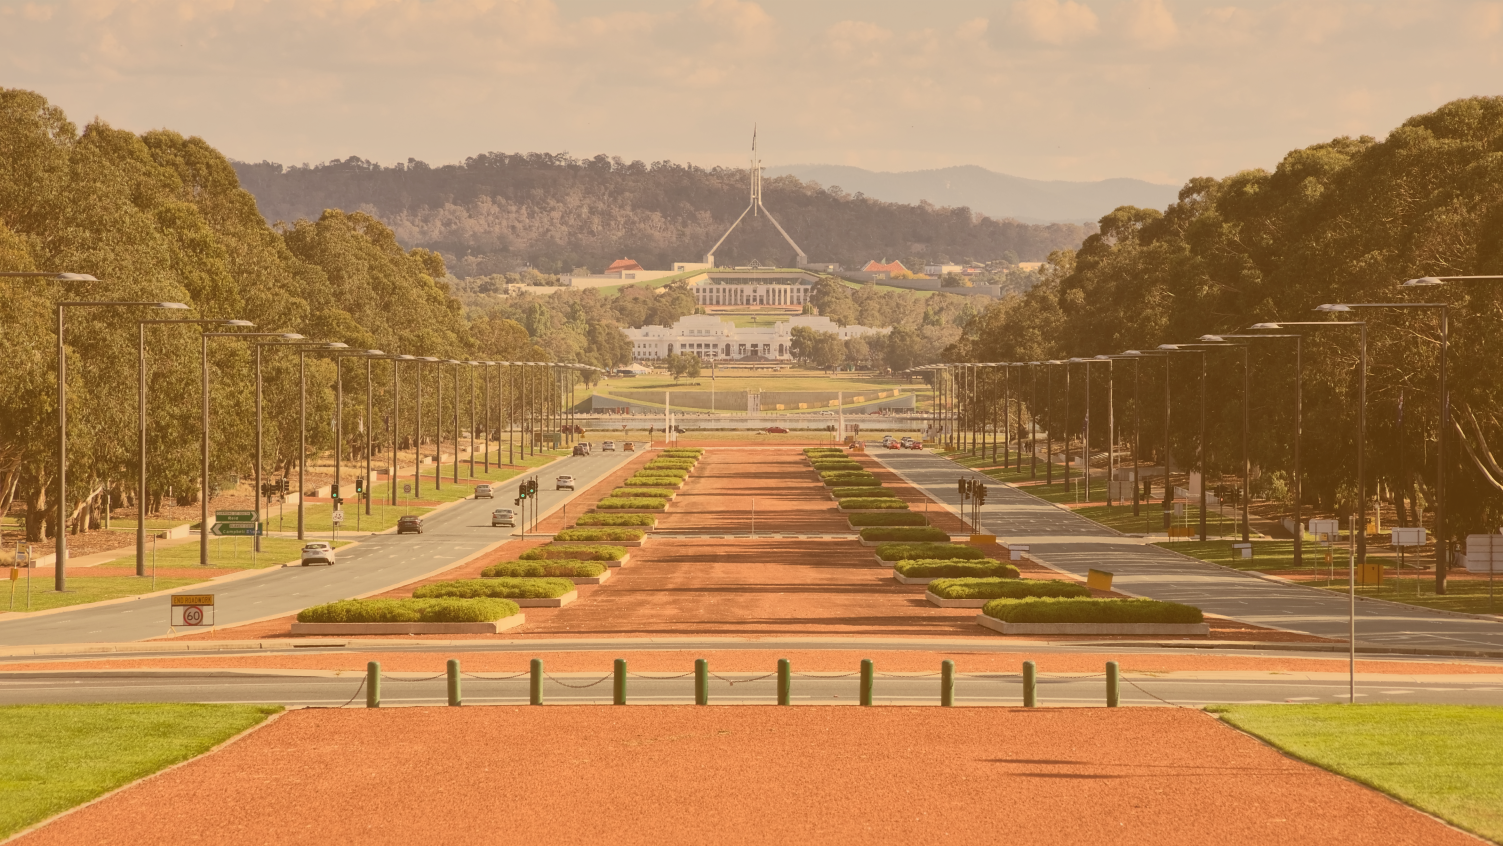 Photo: "ANZAC Parade from the Australian War Memorial, Canberra ACT", by Thennicke, licensed under CC BY-SA 4.0. Hue modified from the original